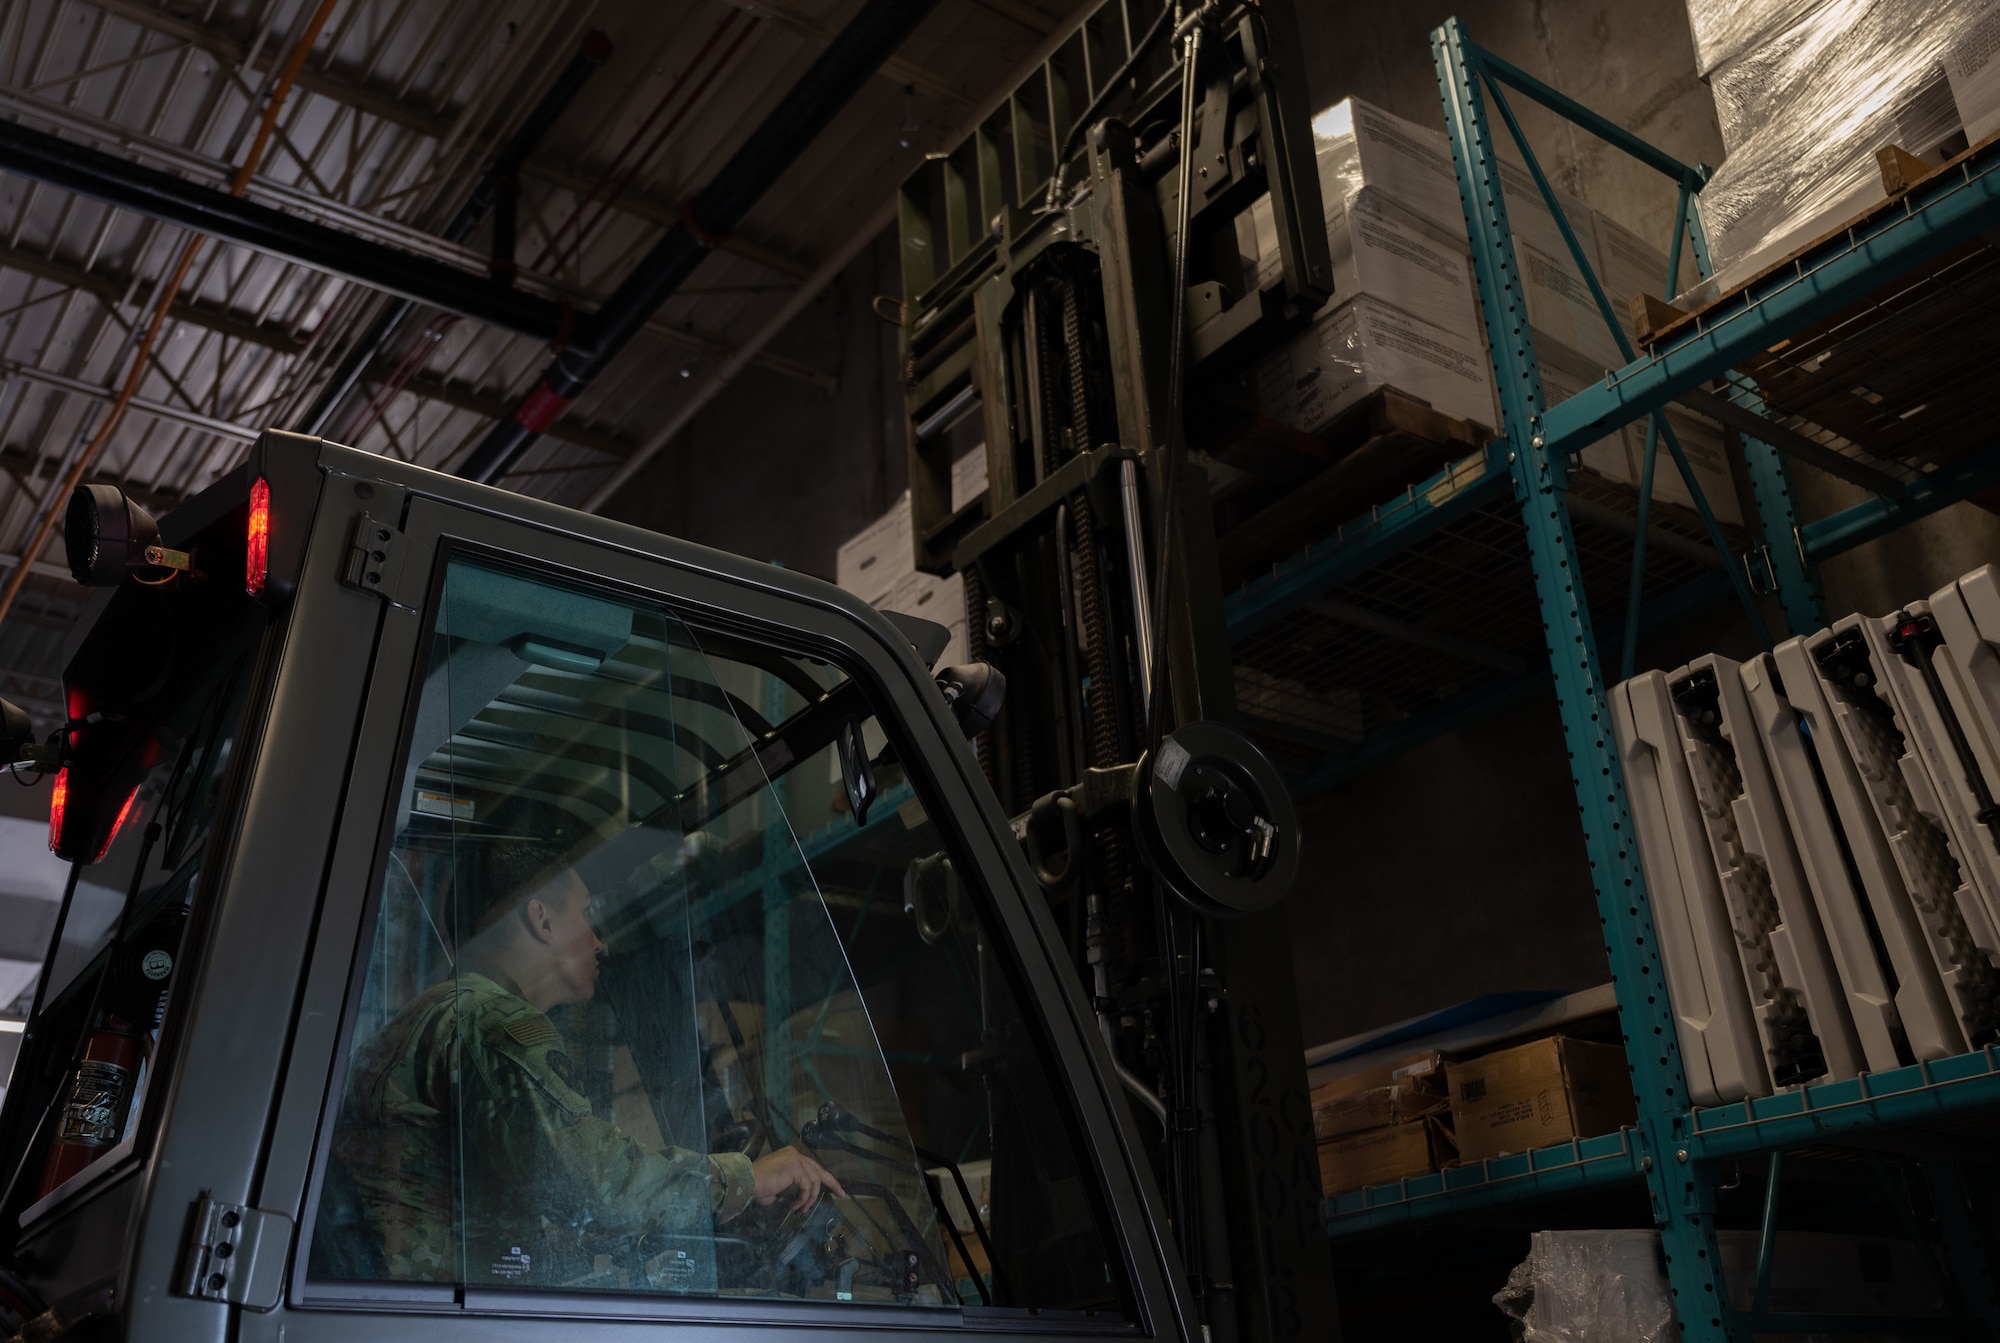 An Airman operates a forklift in a warehouse